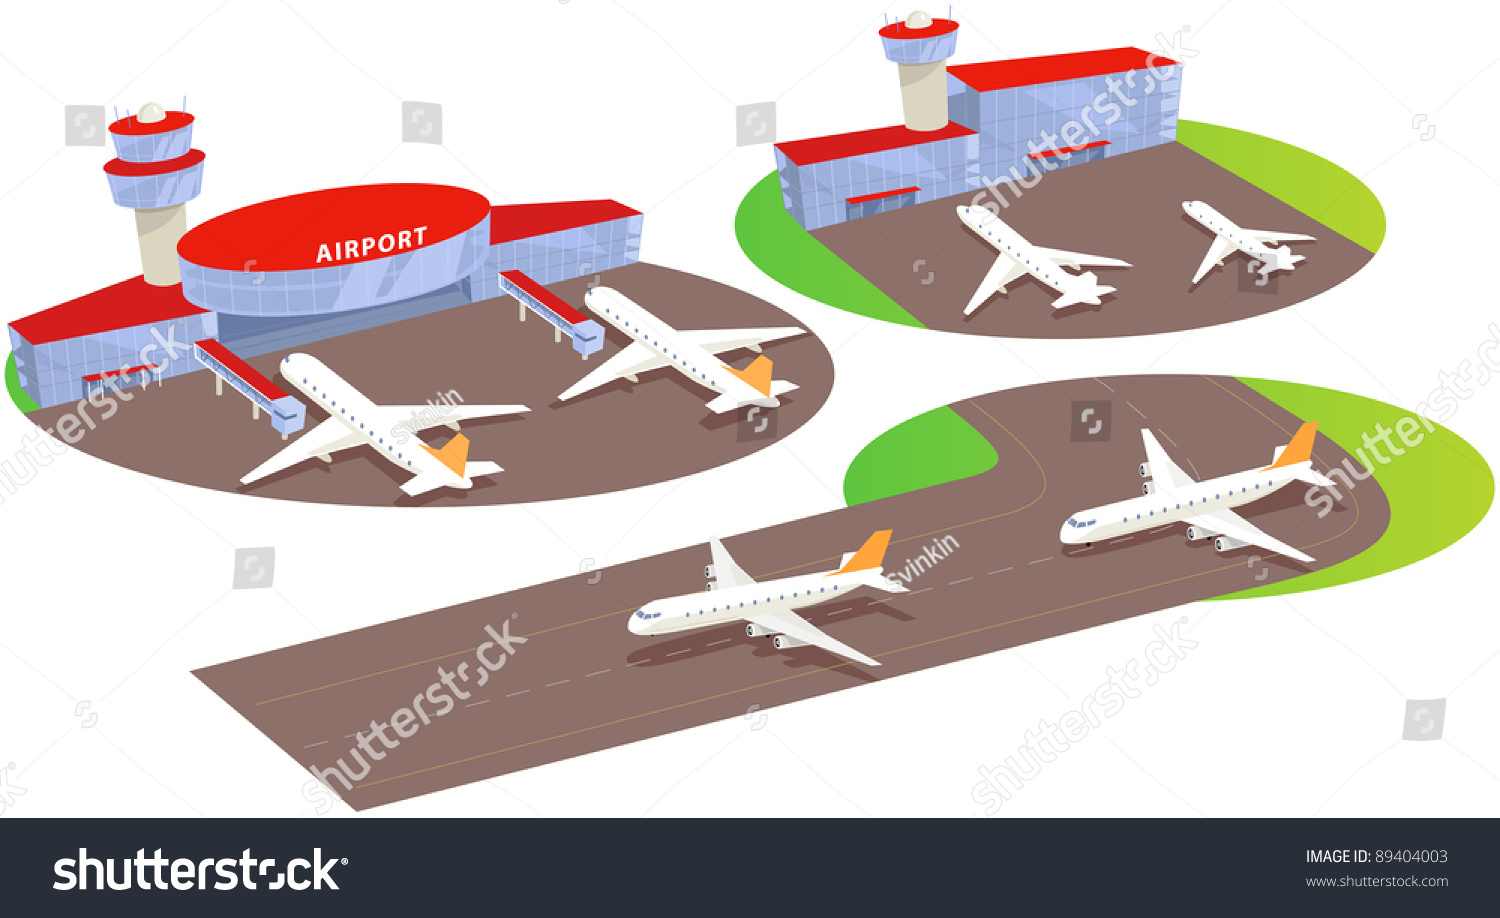 airport safety clipart - photo #39